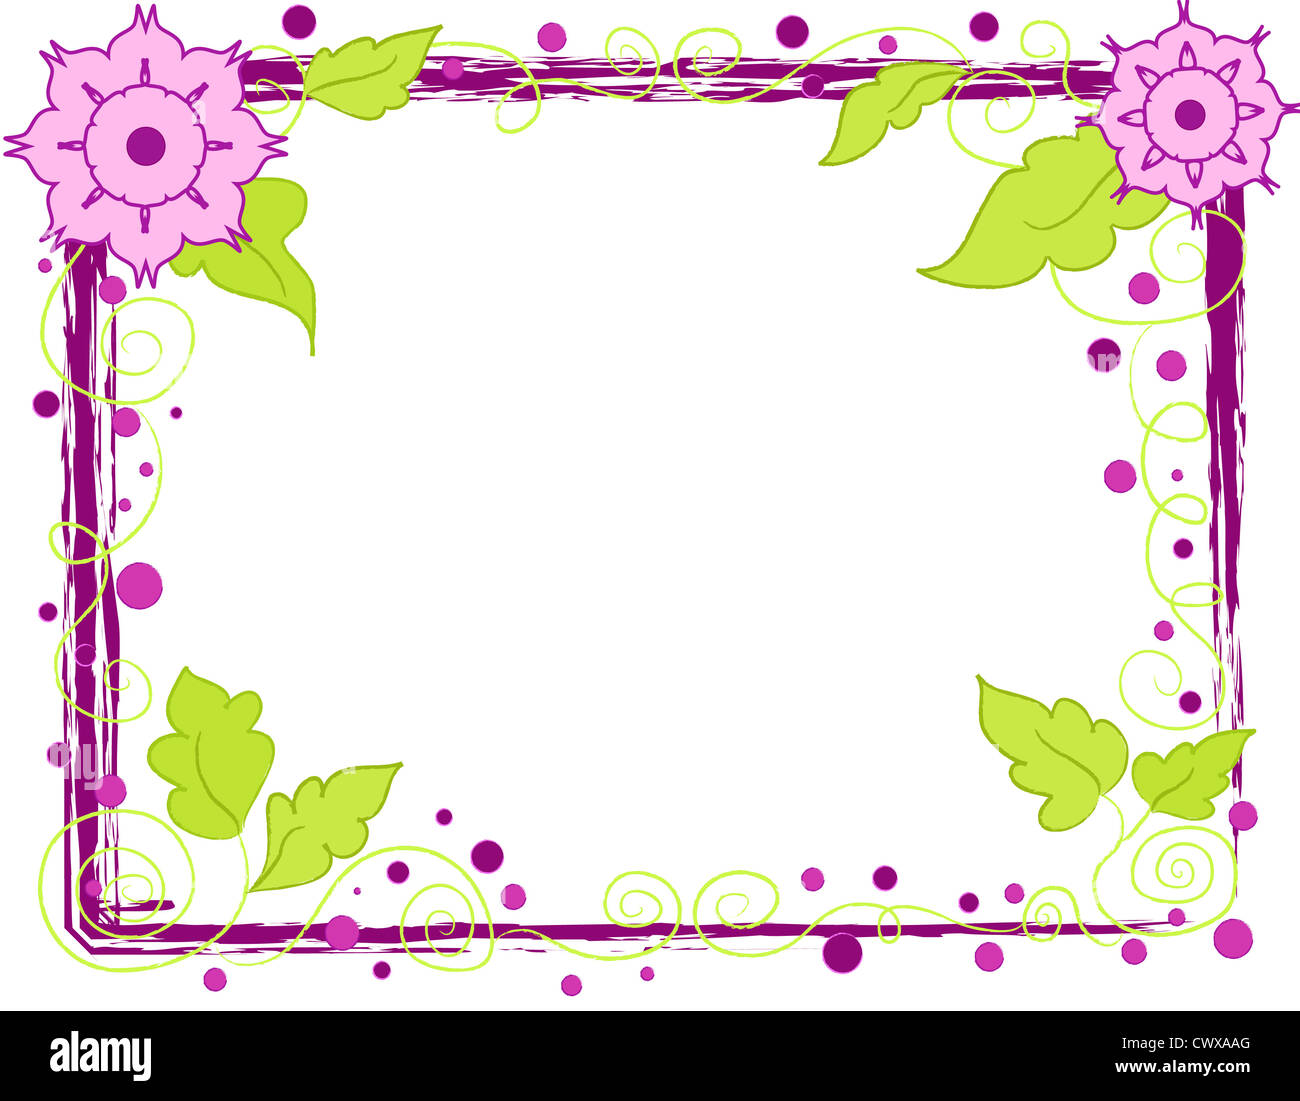 Violet flowers and leaves frame Stock Photo